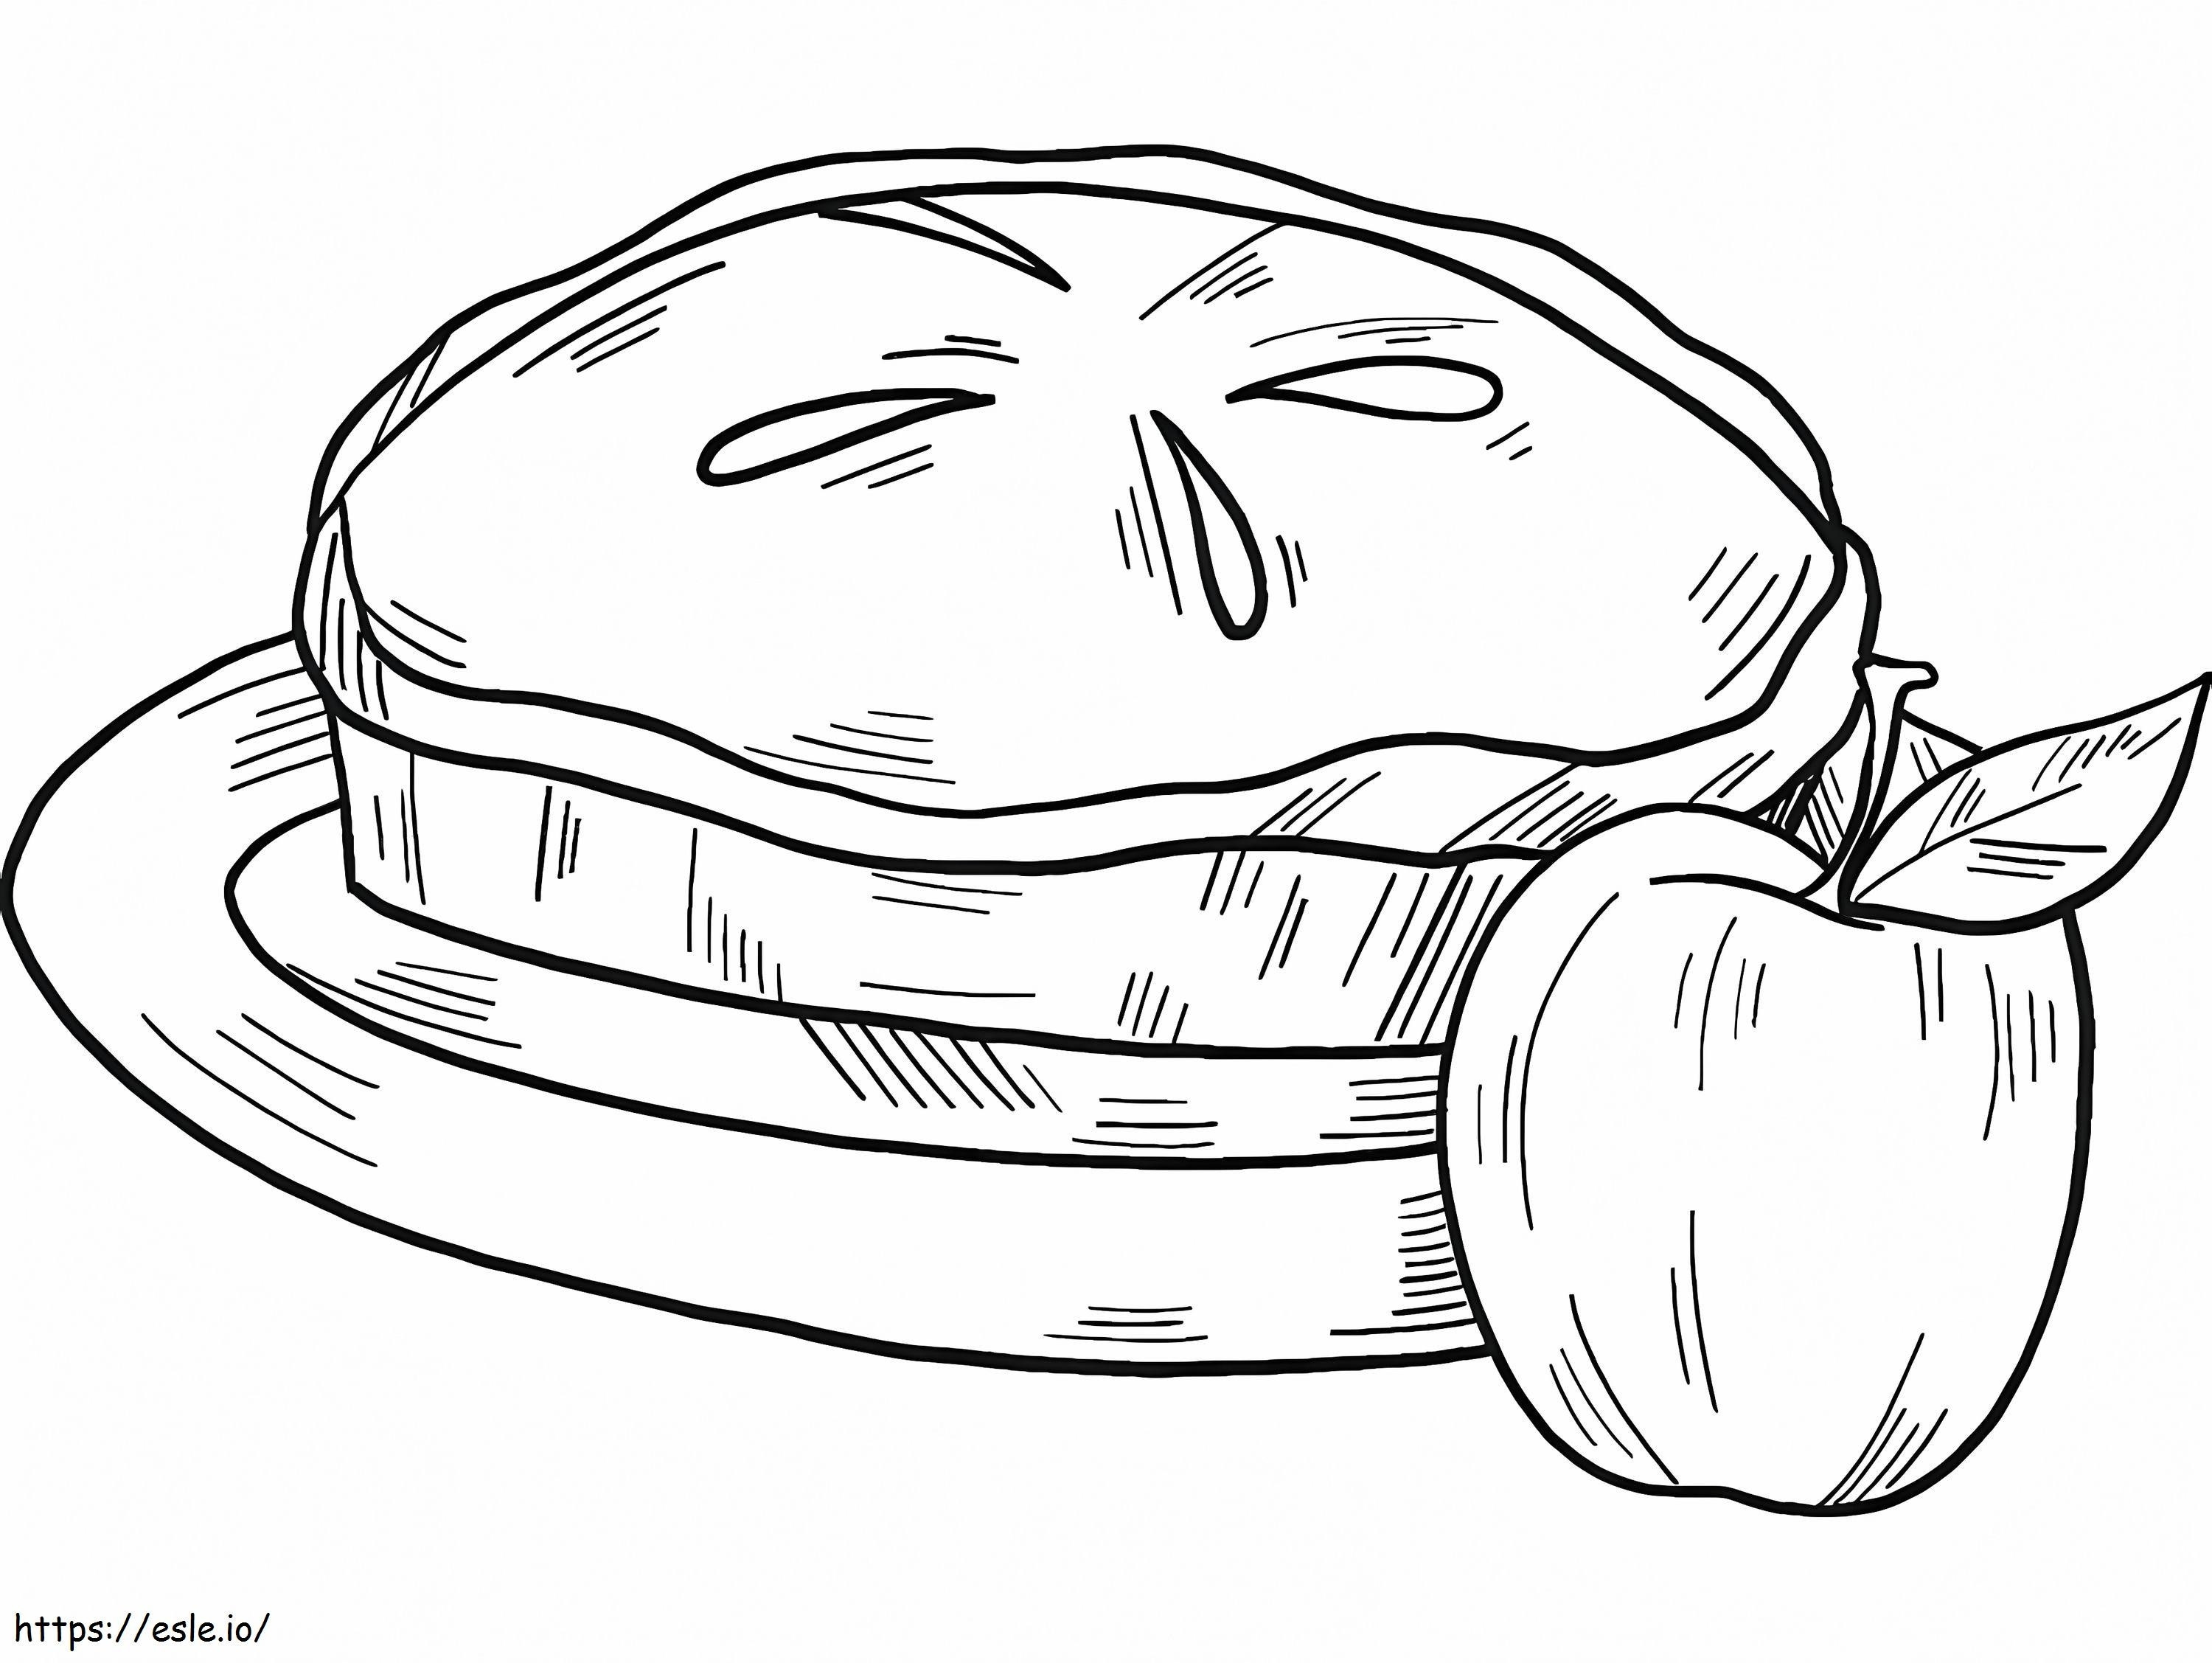 Apple Pie 2 coloring page